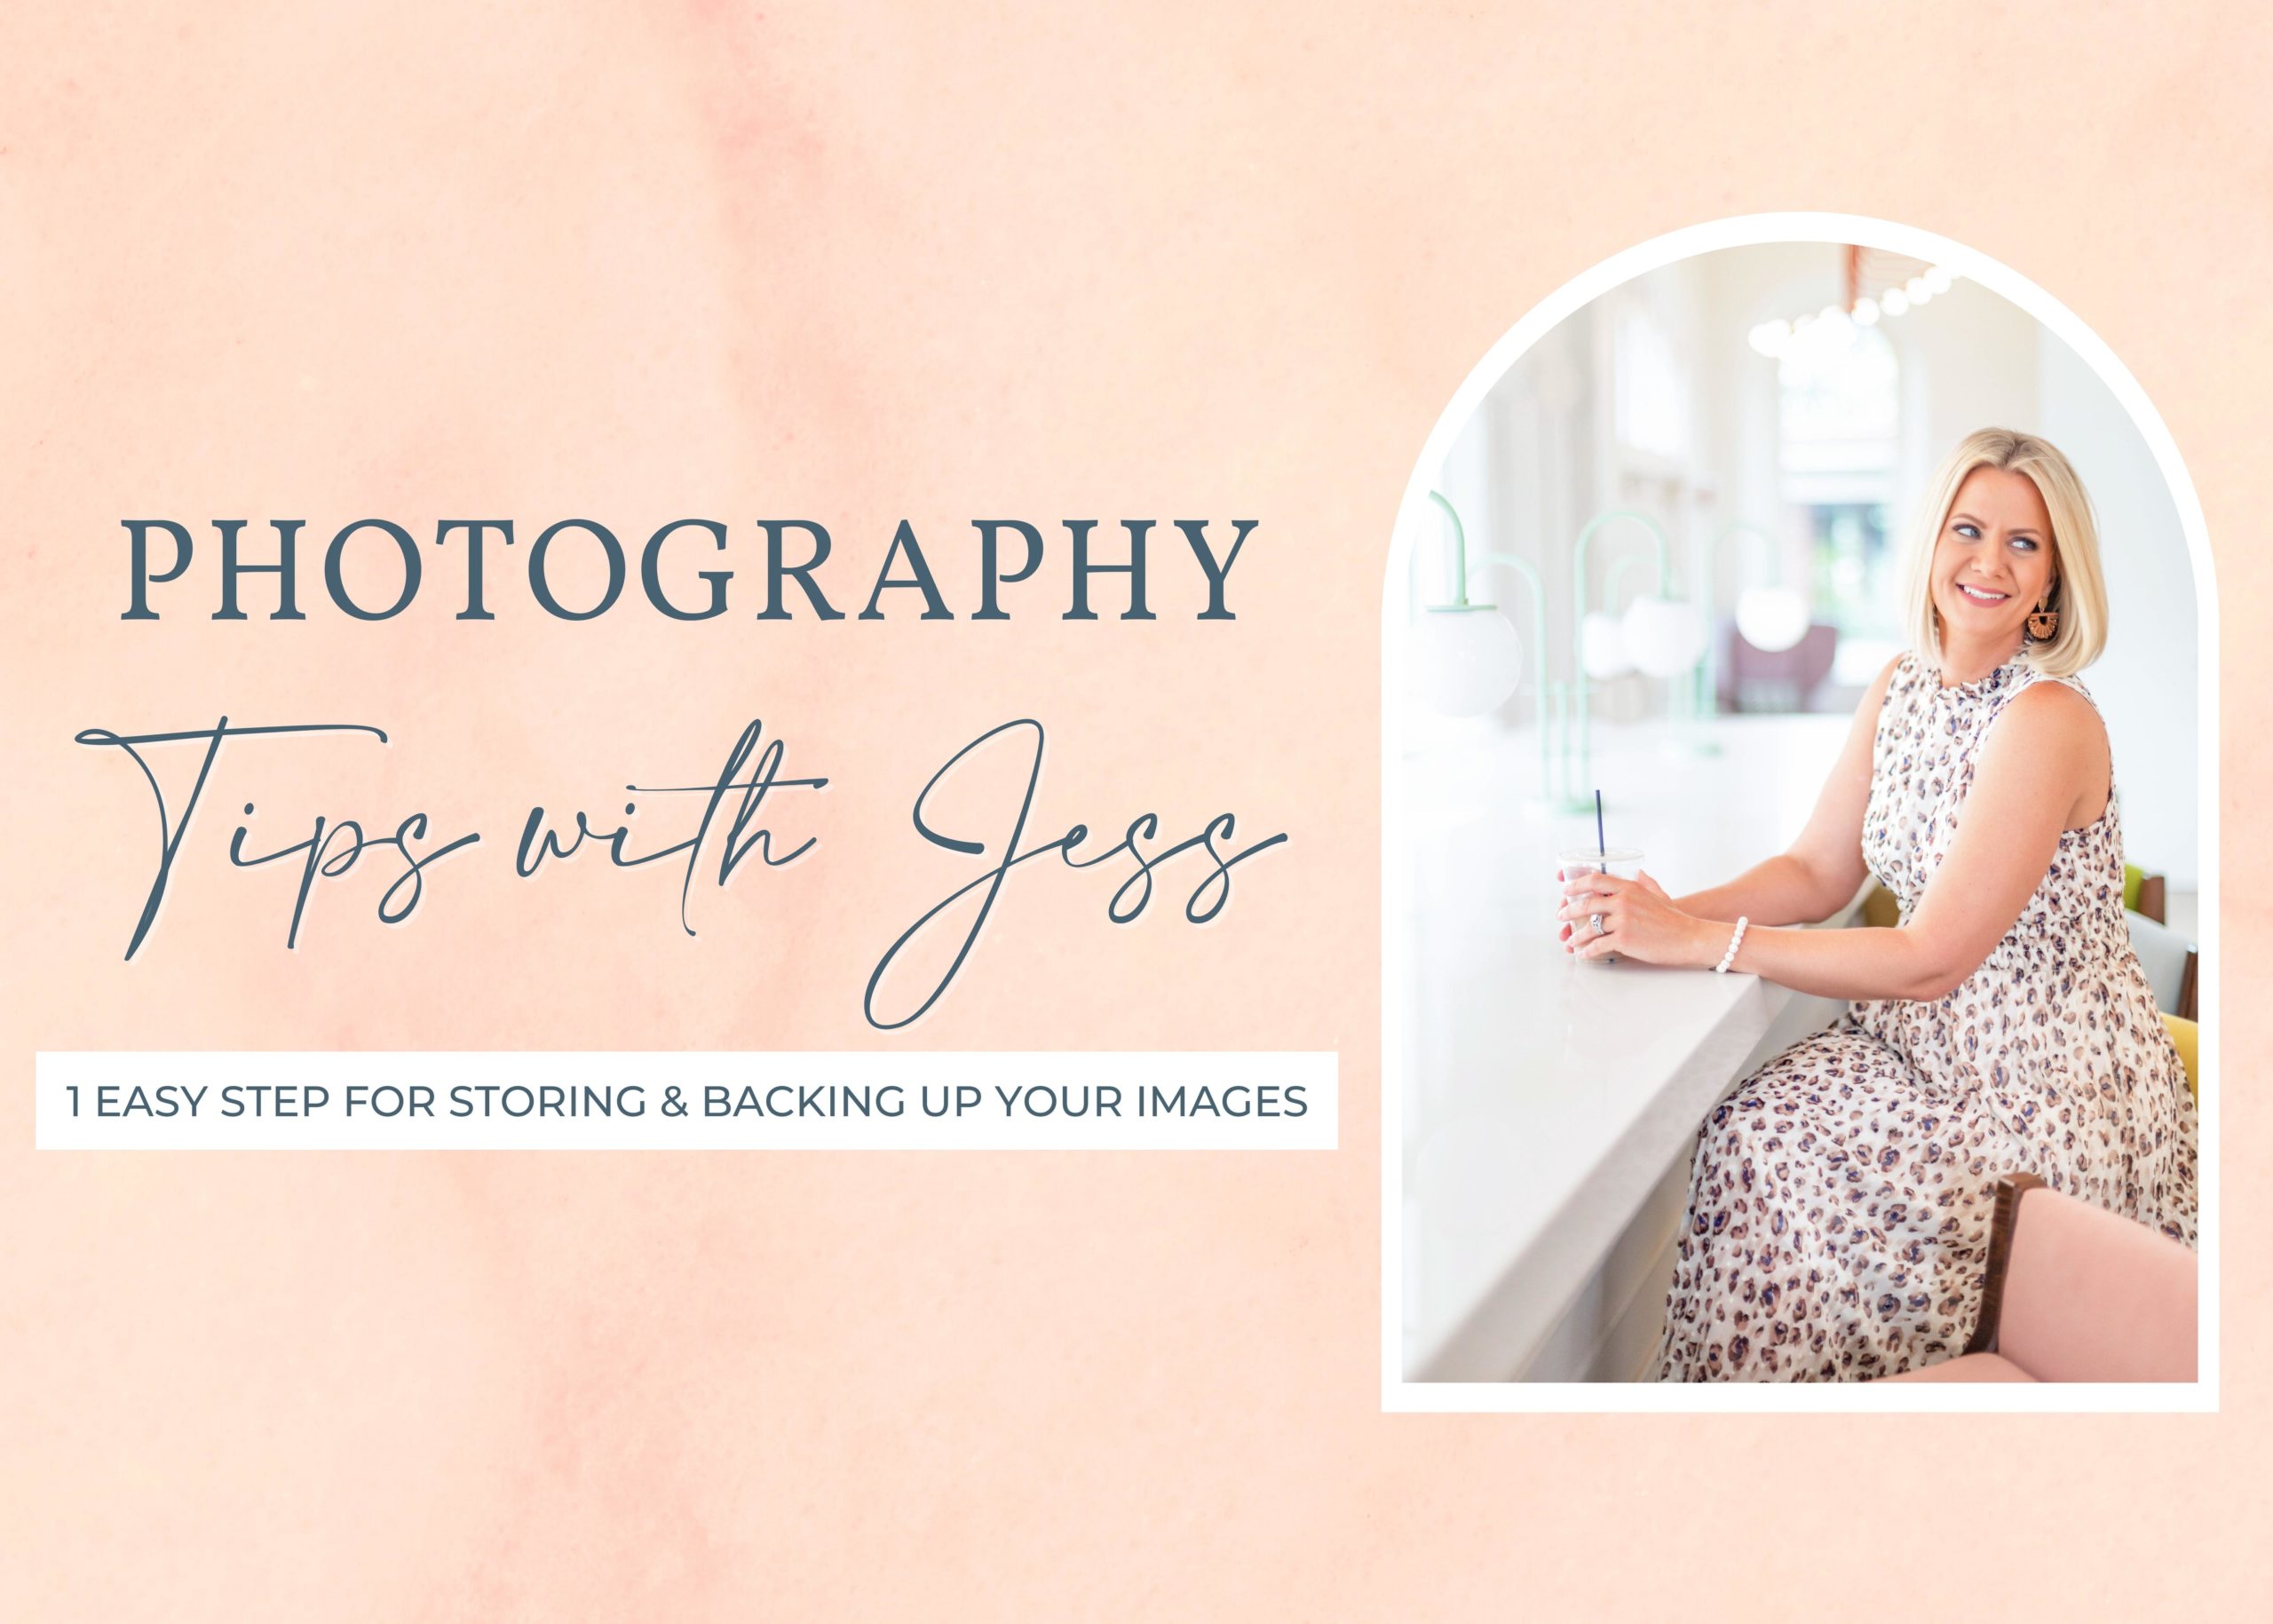 Wedding Photography Tip, how to store and back up Images